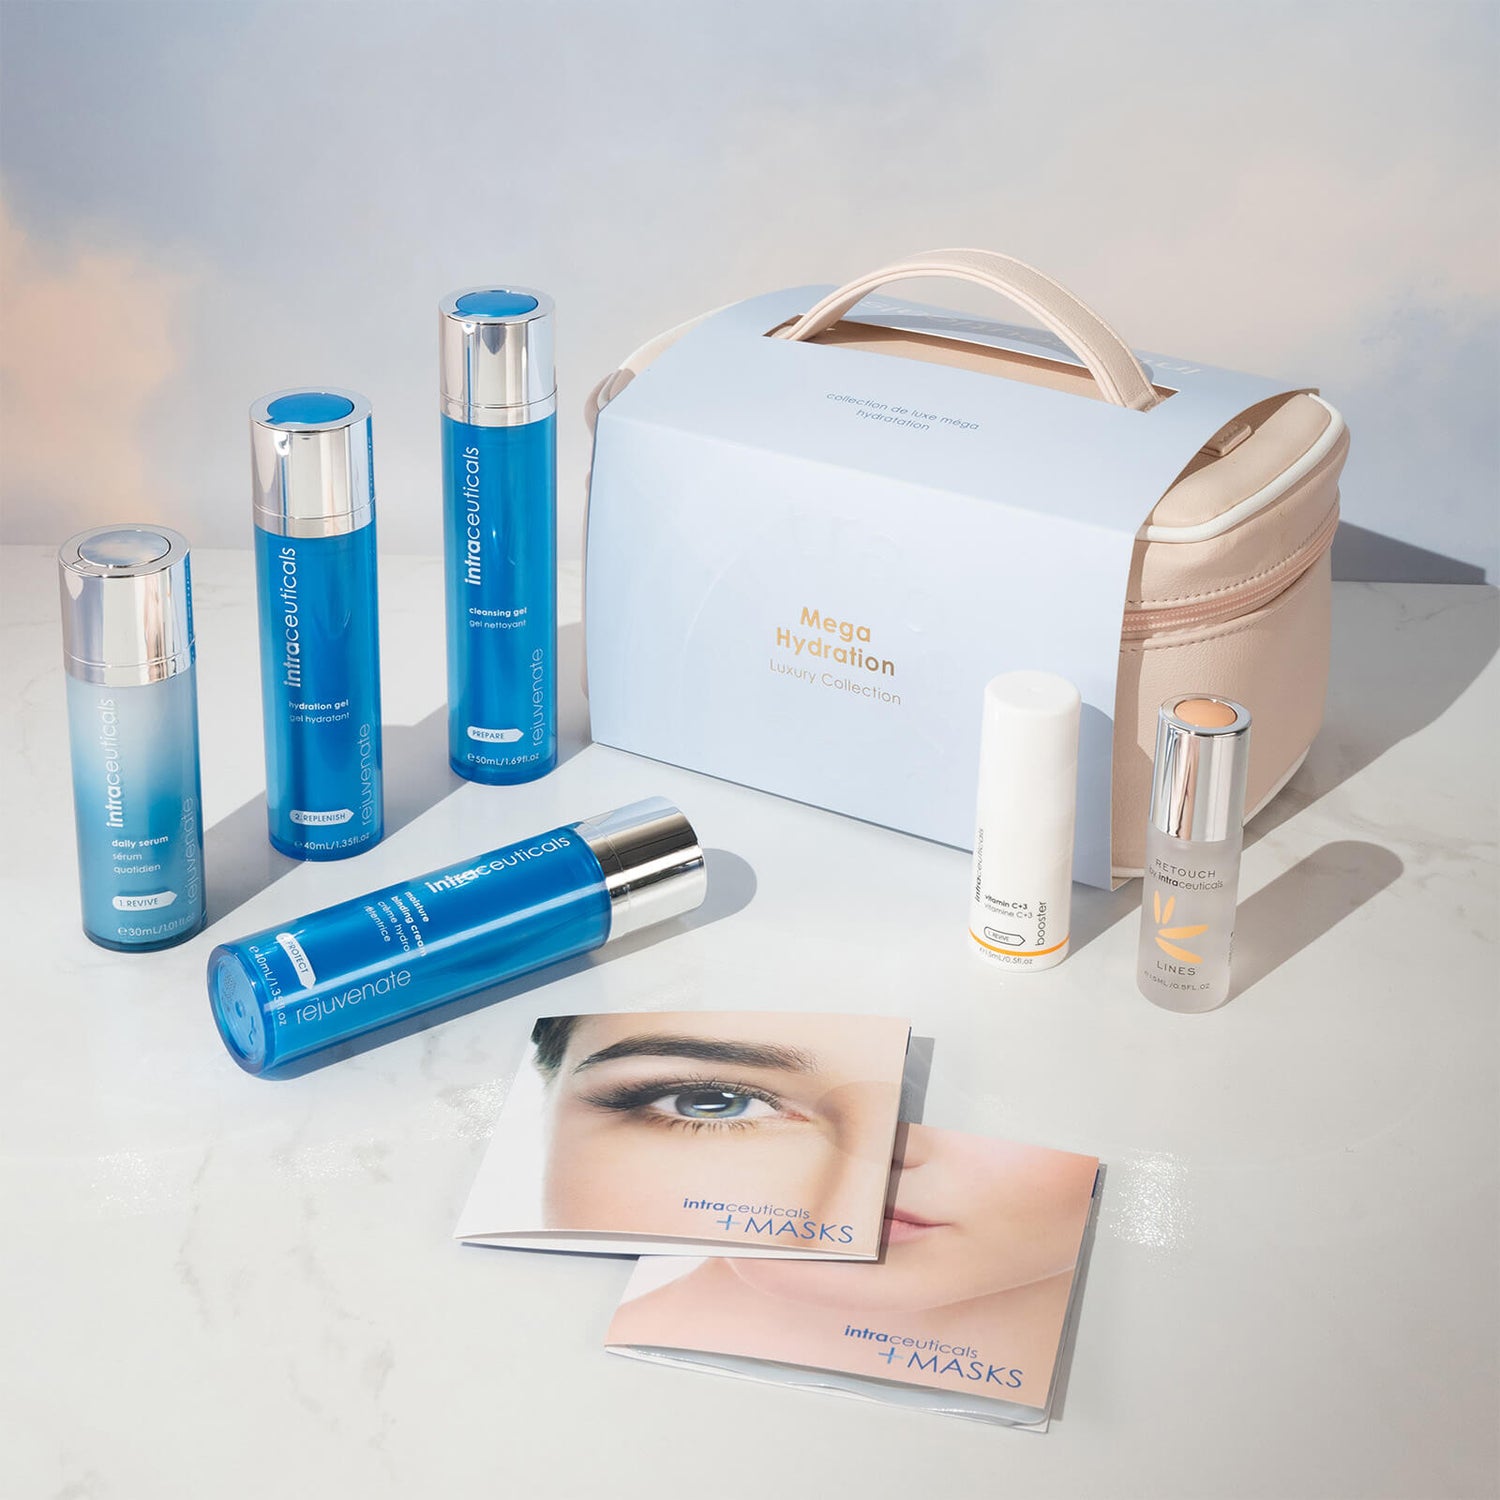 Intraceuticals Mega Hydration Luxury Collection